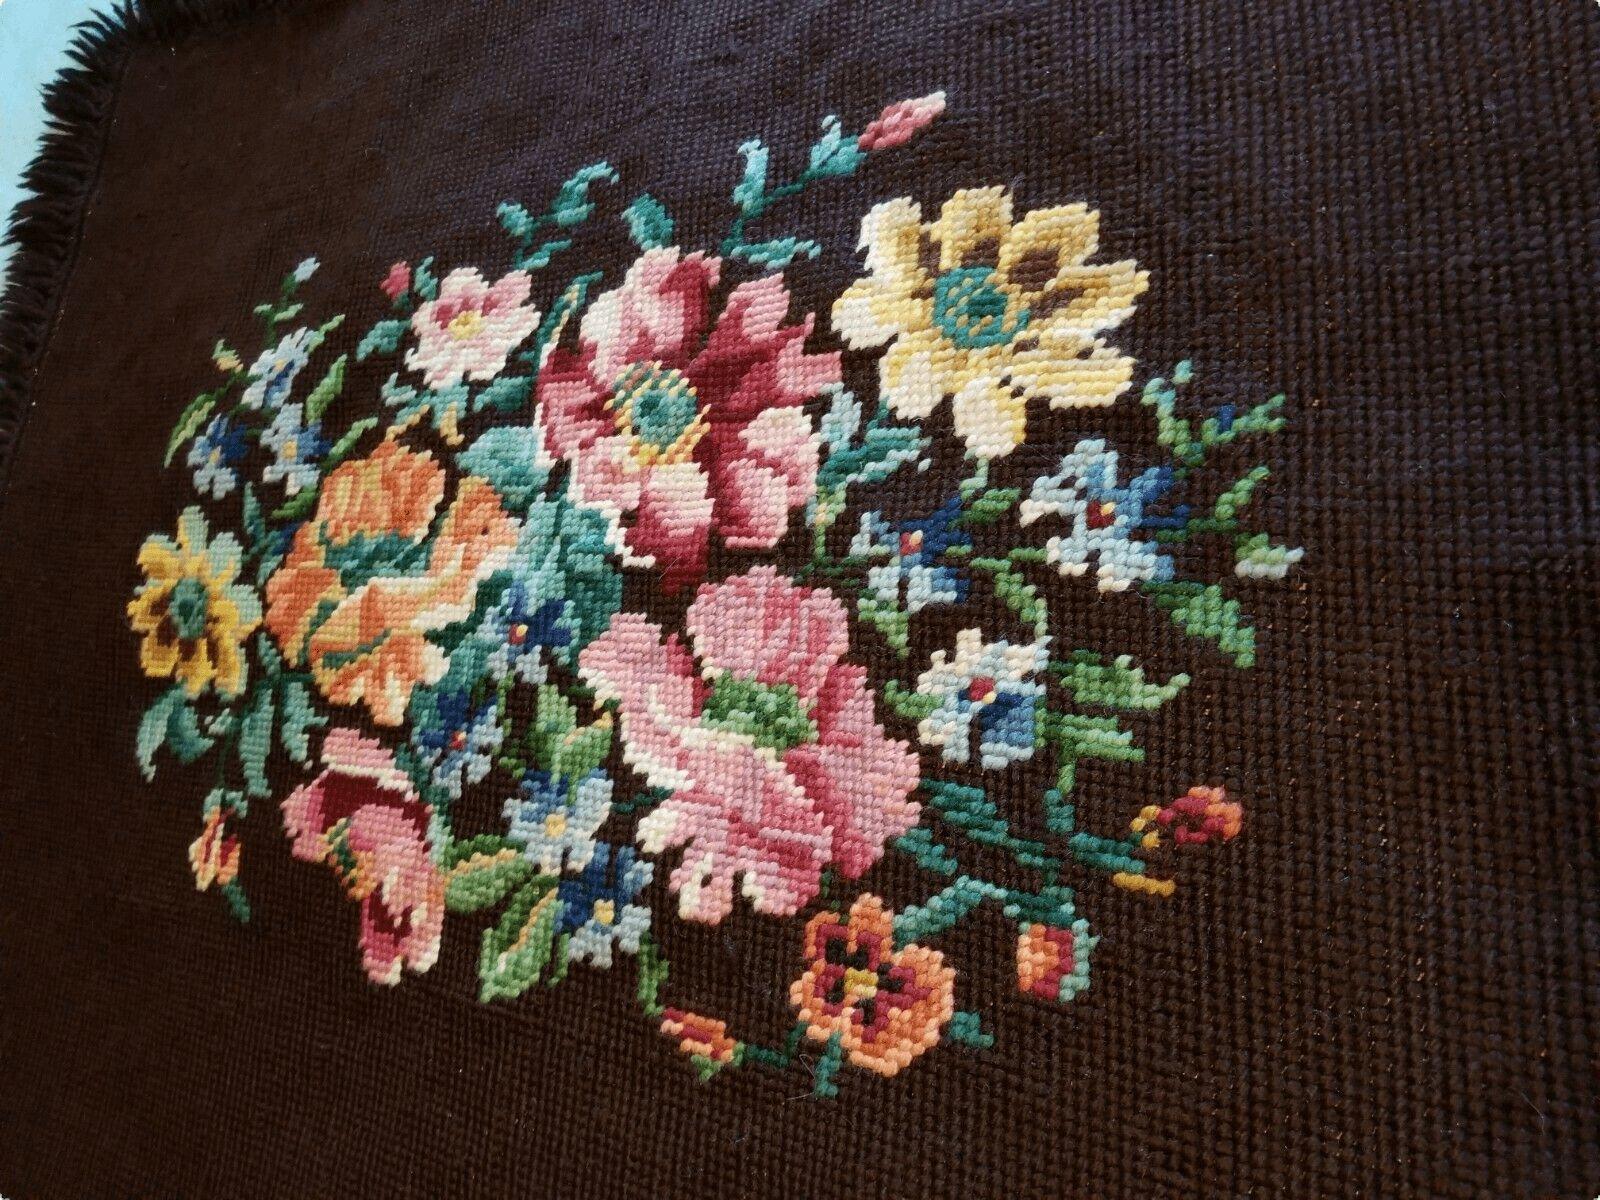 Antique Handmade Needlepoint Floral Tapestry 3X4 Ft